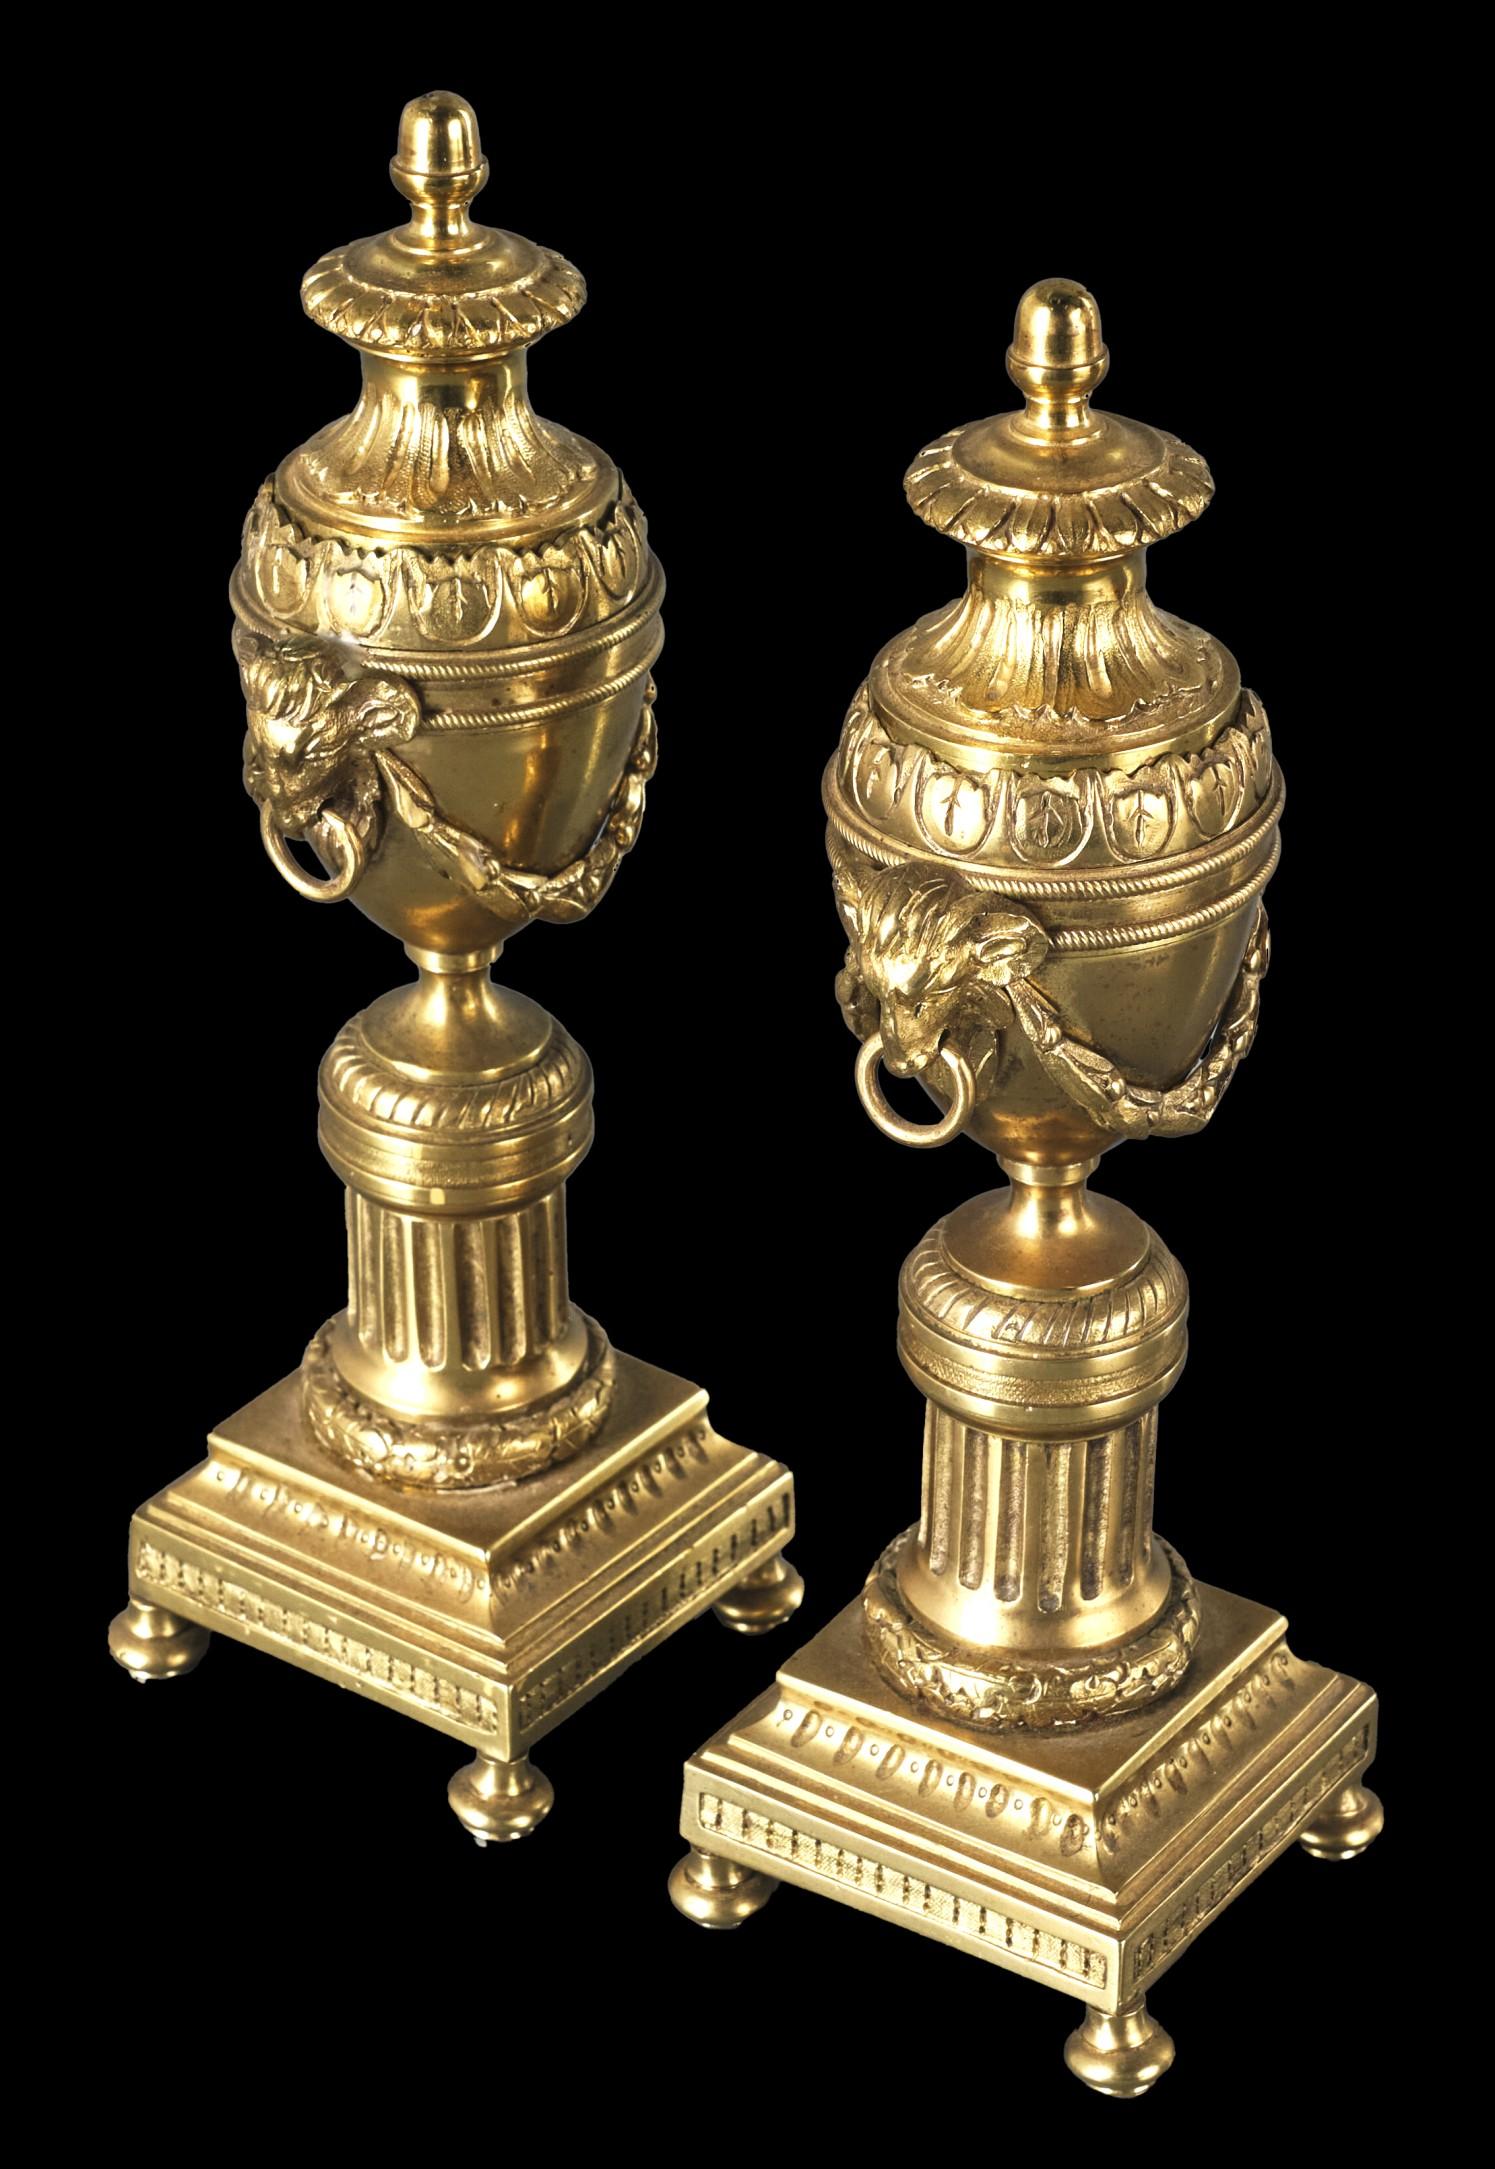 English A Fine Pair of 19th C. Neoclassical Style Gilt Bronze Cassolettes / Candlesticks For Sale